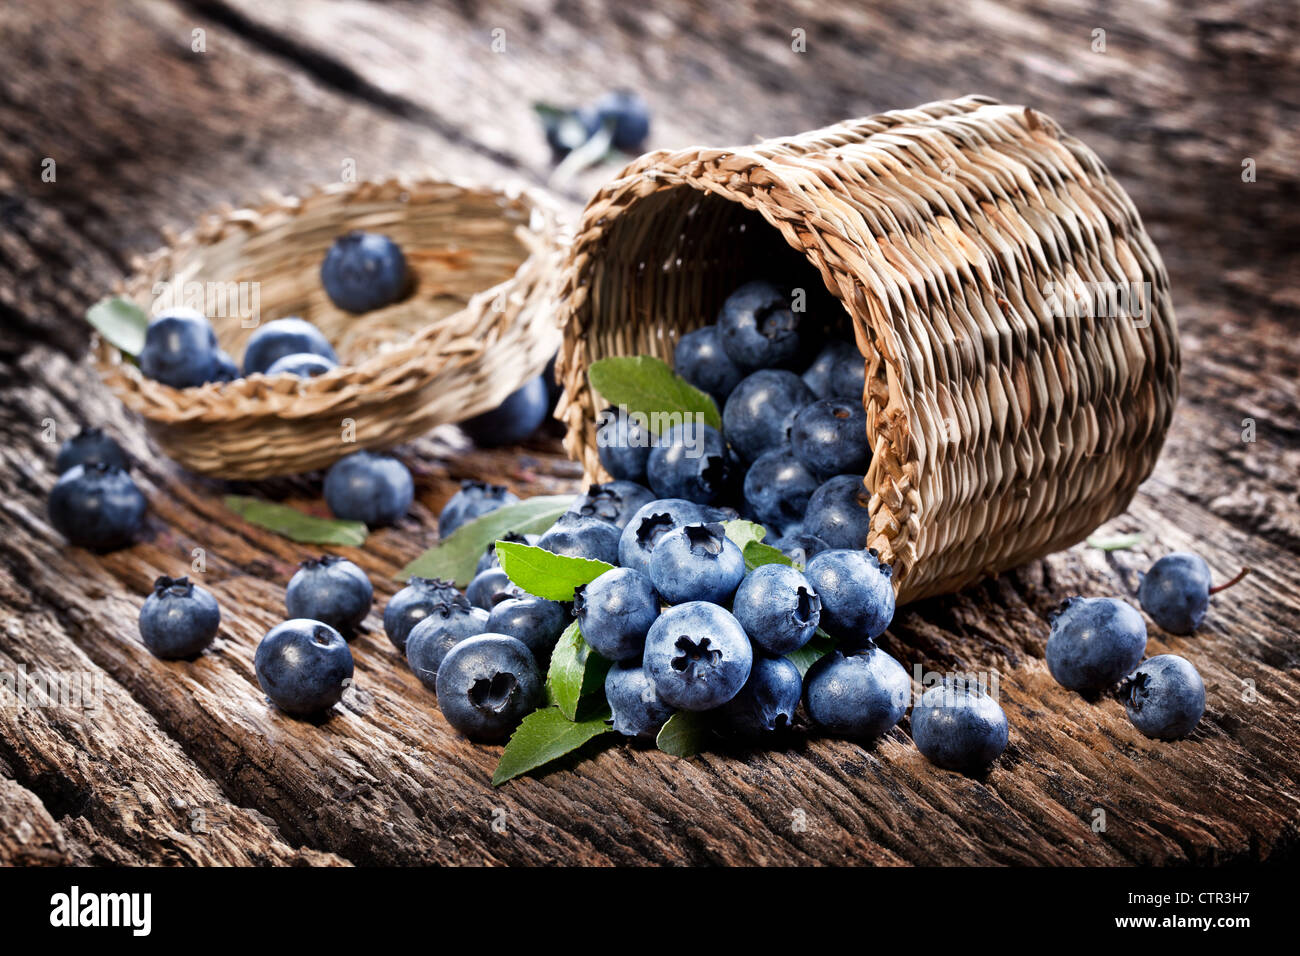 Blueberries have dropped from the basket on an old wooden table. Stock Photo